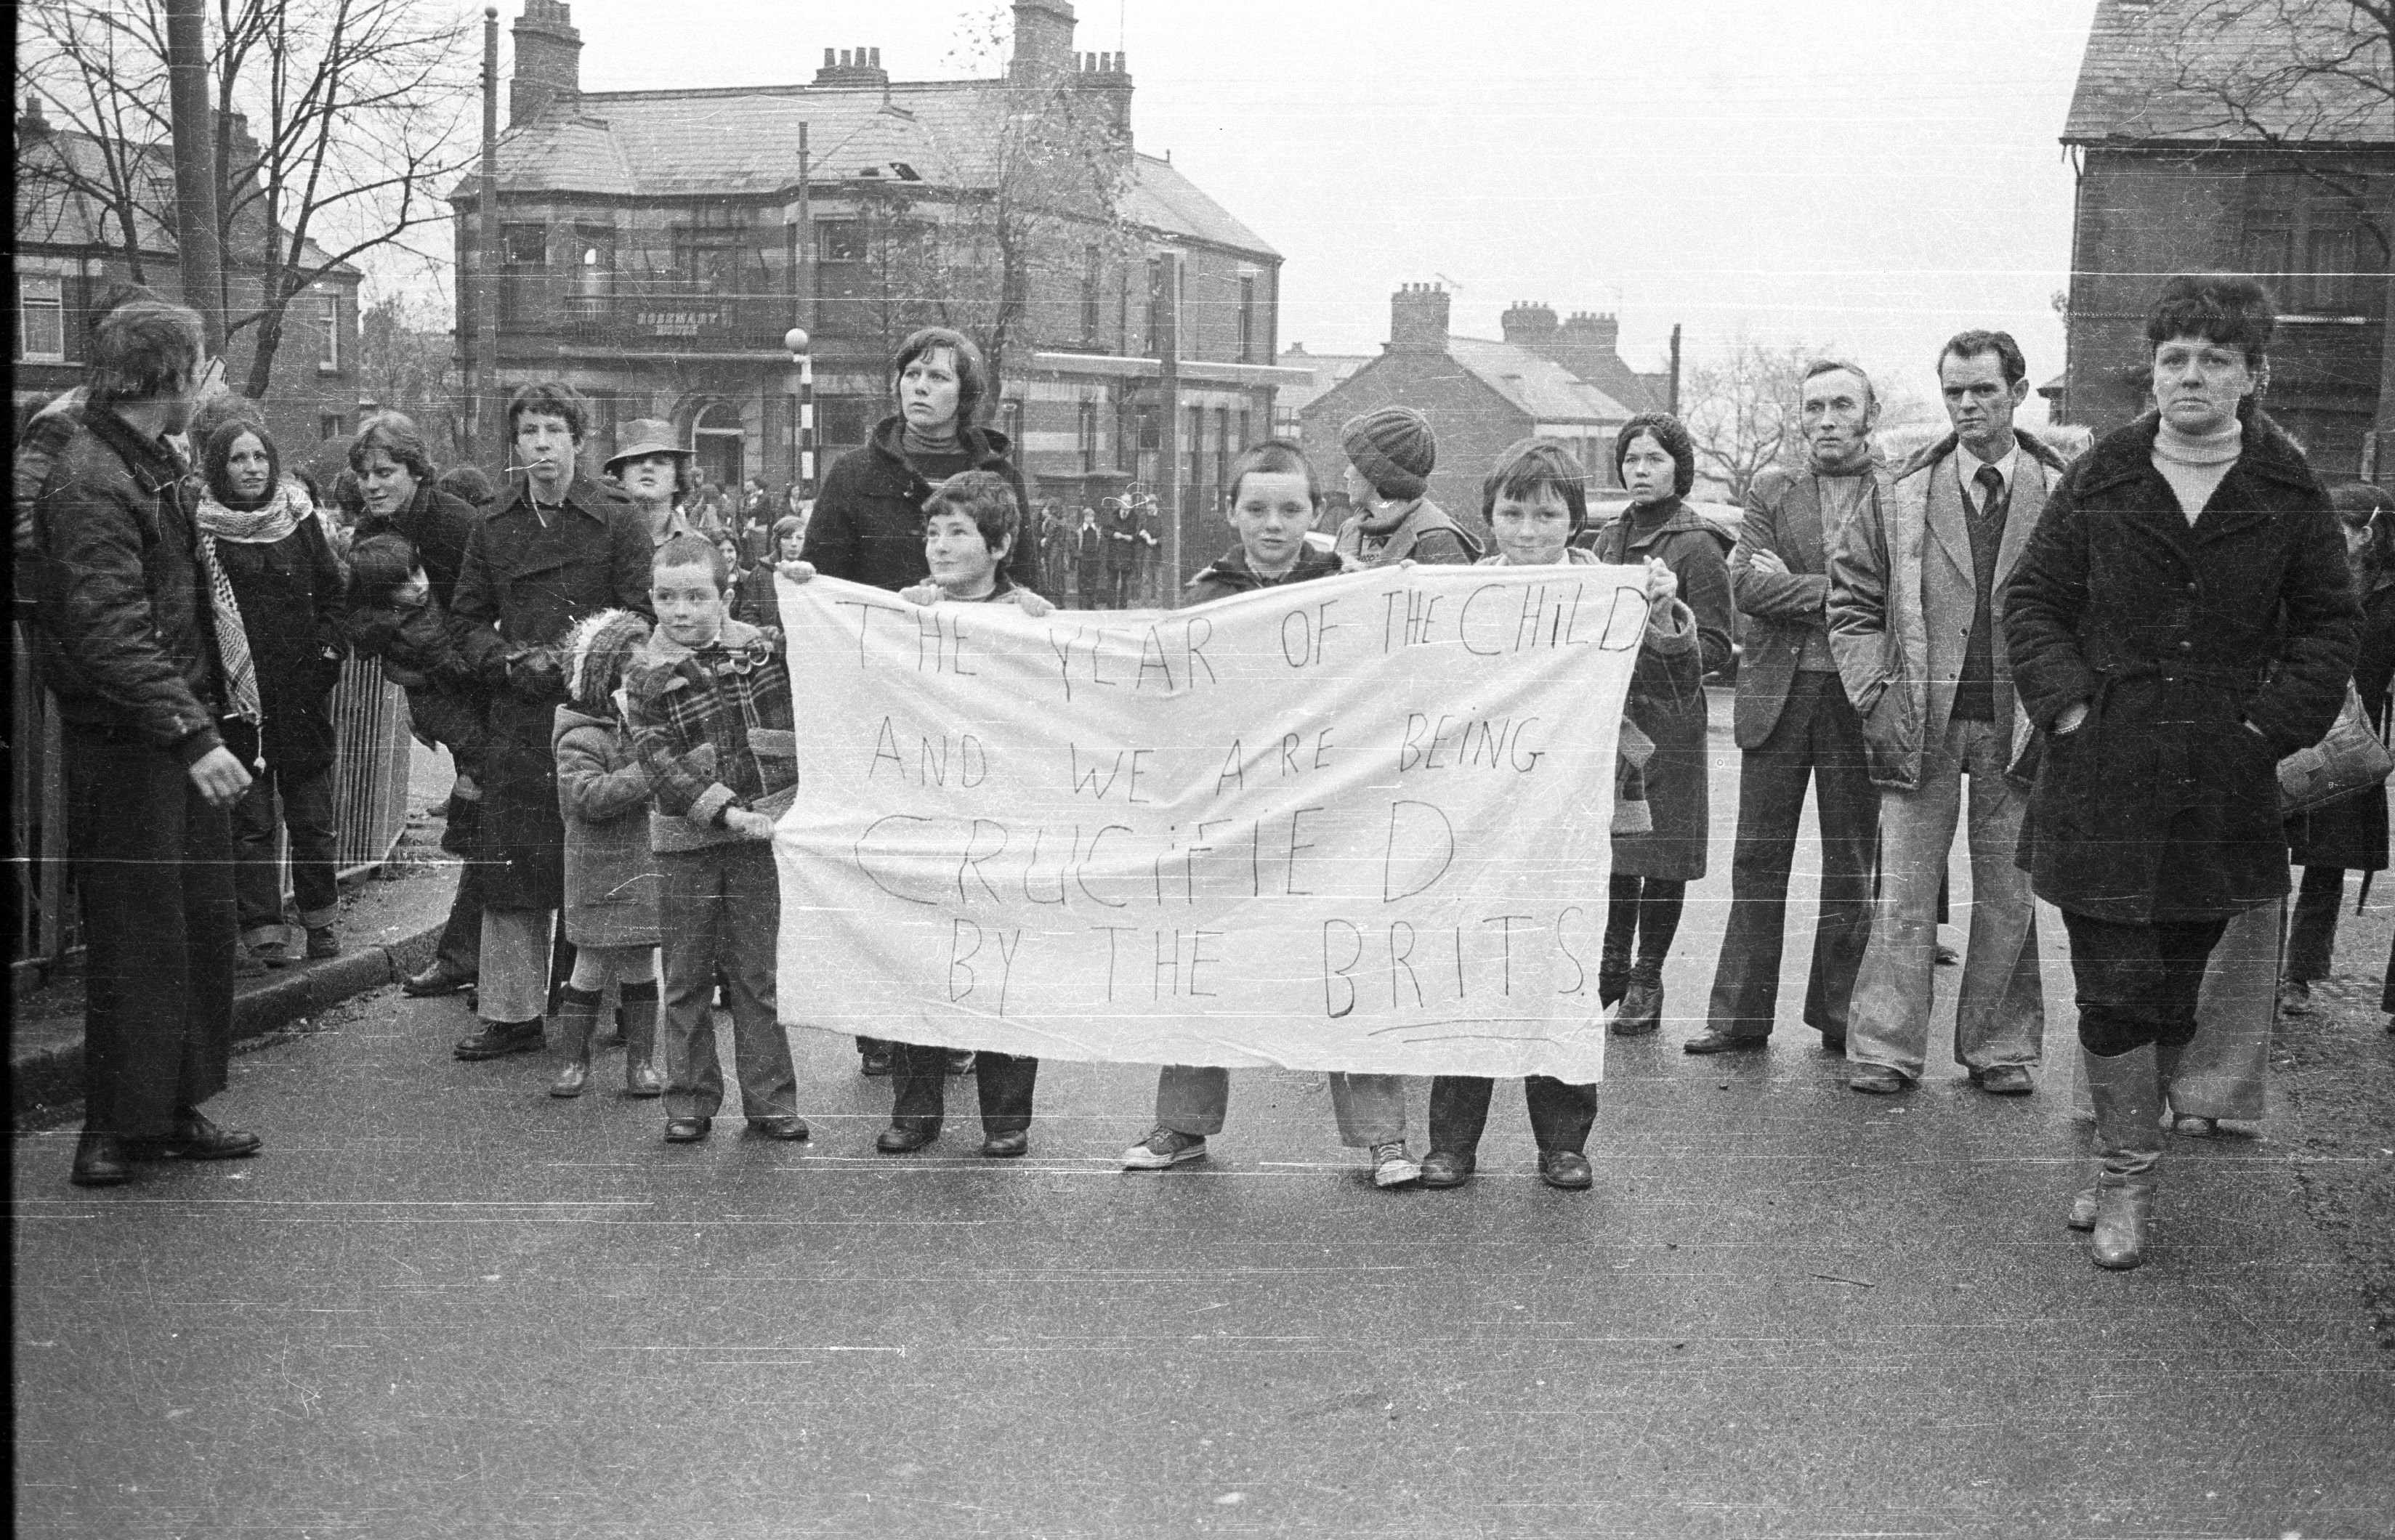 Bottom of Whiterock Road saw opposition to construction of an army fort in Turf Lodge. Picket organised by Sinn Féin, Republican Clubs, Irish Republican Socialist Party, Turf Lodge Flats Demolition Committee and Women Against Imperialism